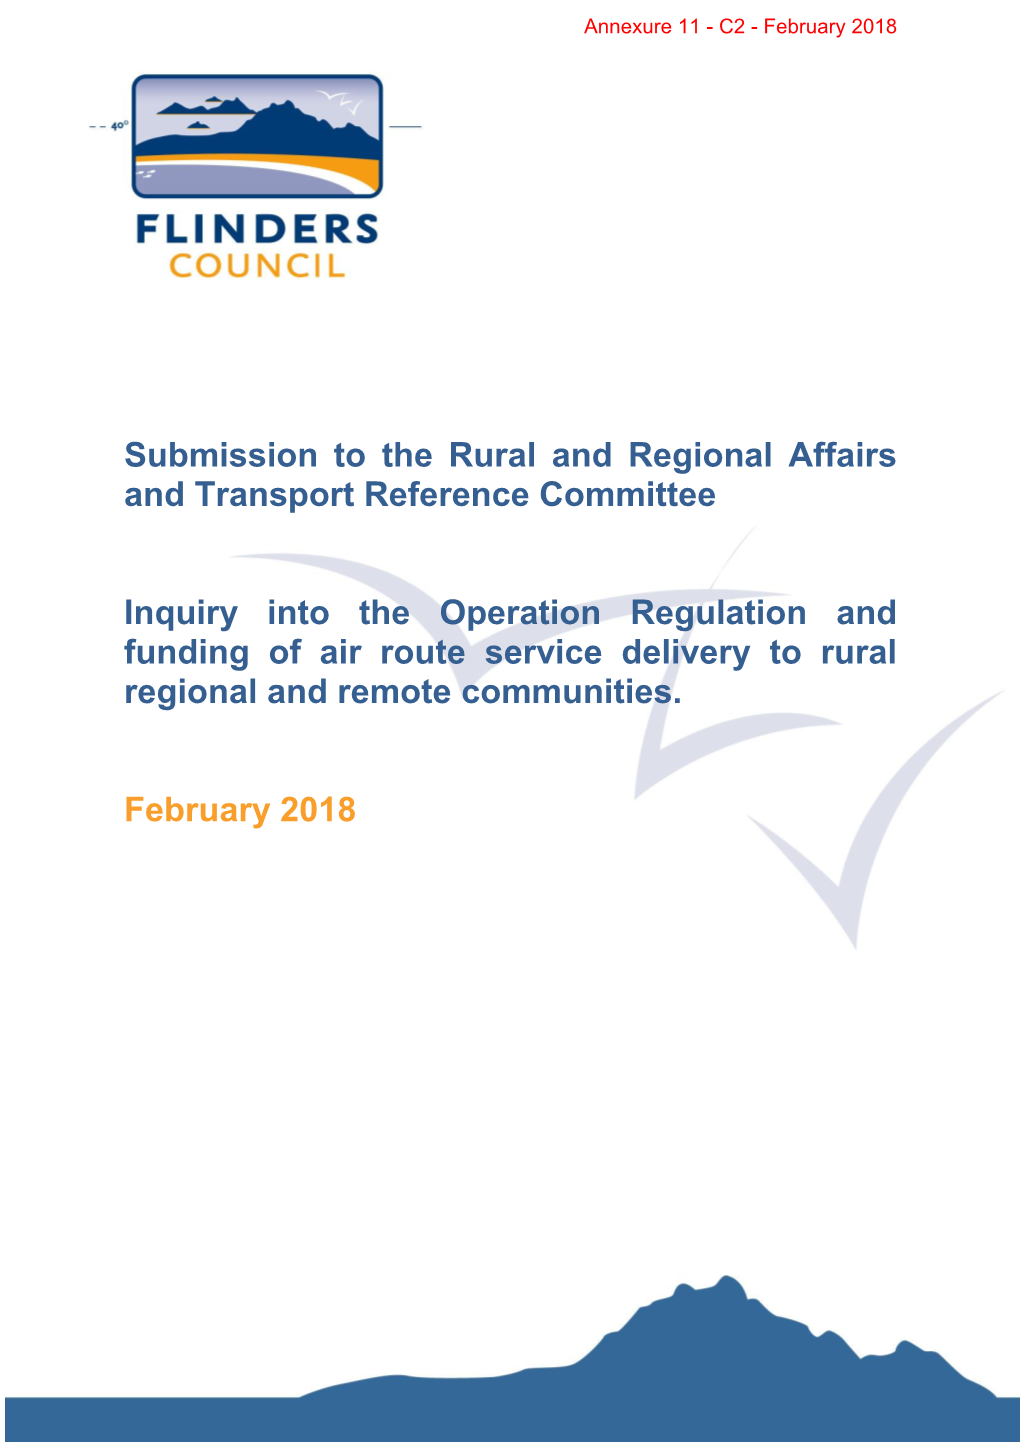 Submission to the Rural and Regional Affairs and Transport Reference Committee